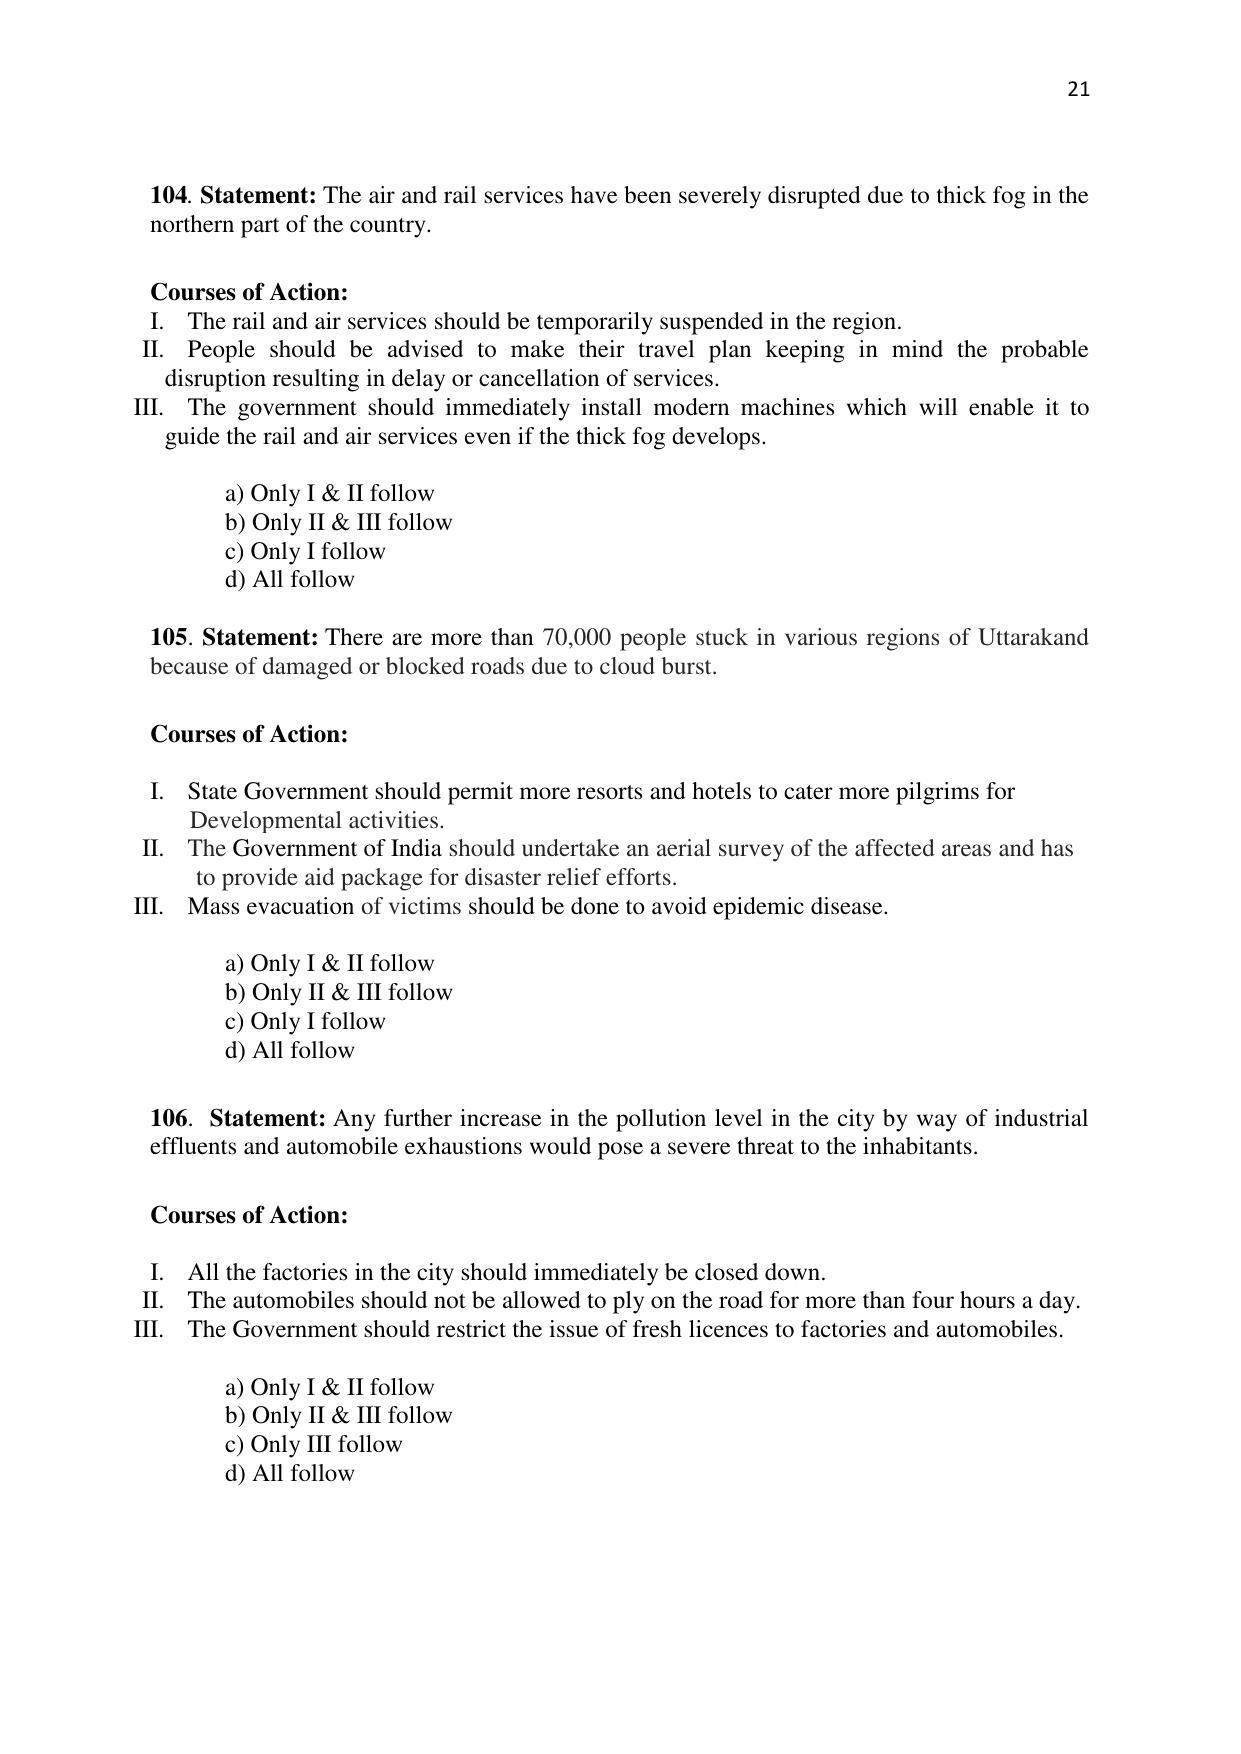 KMAT Question Papers - November 2016 - Page 21